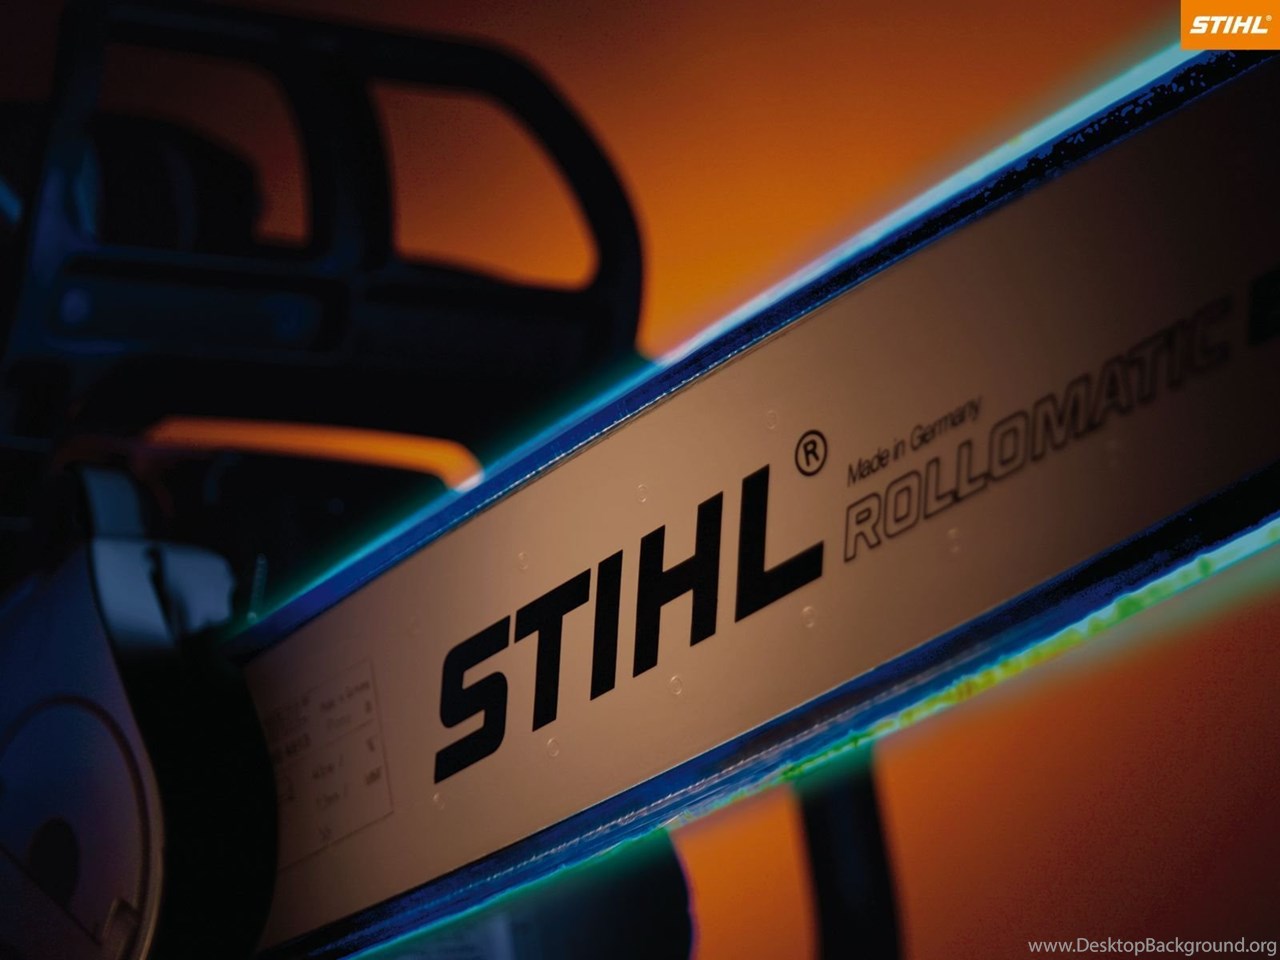 Our Wallpapers For More Stihl On Your Screen Desktop Background Images, Photos, Reviews